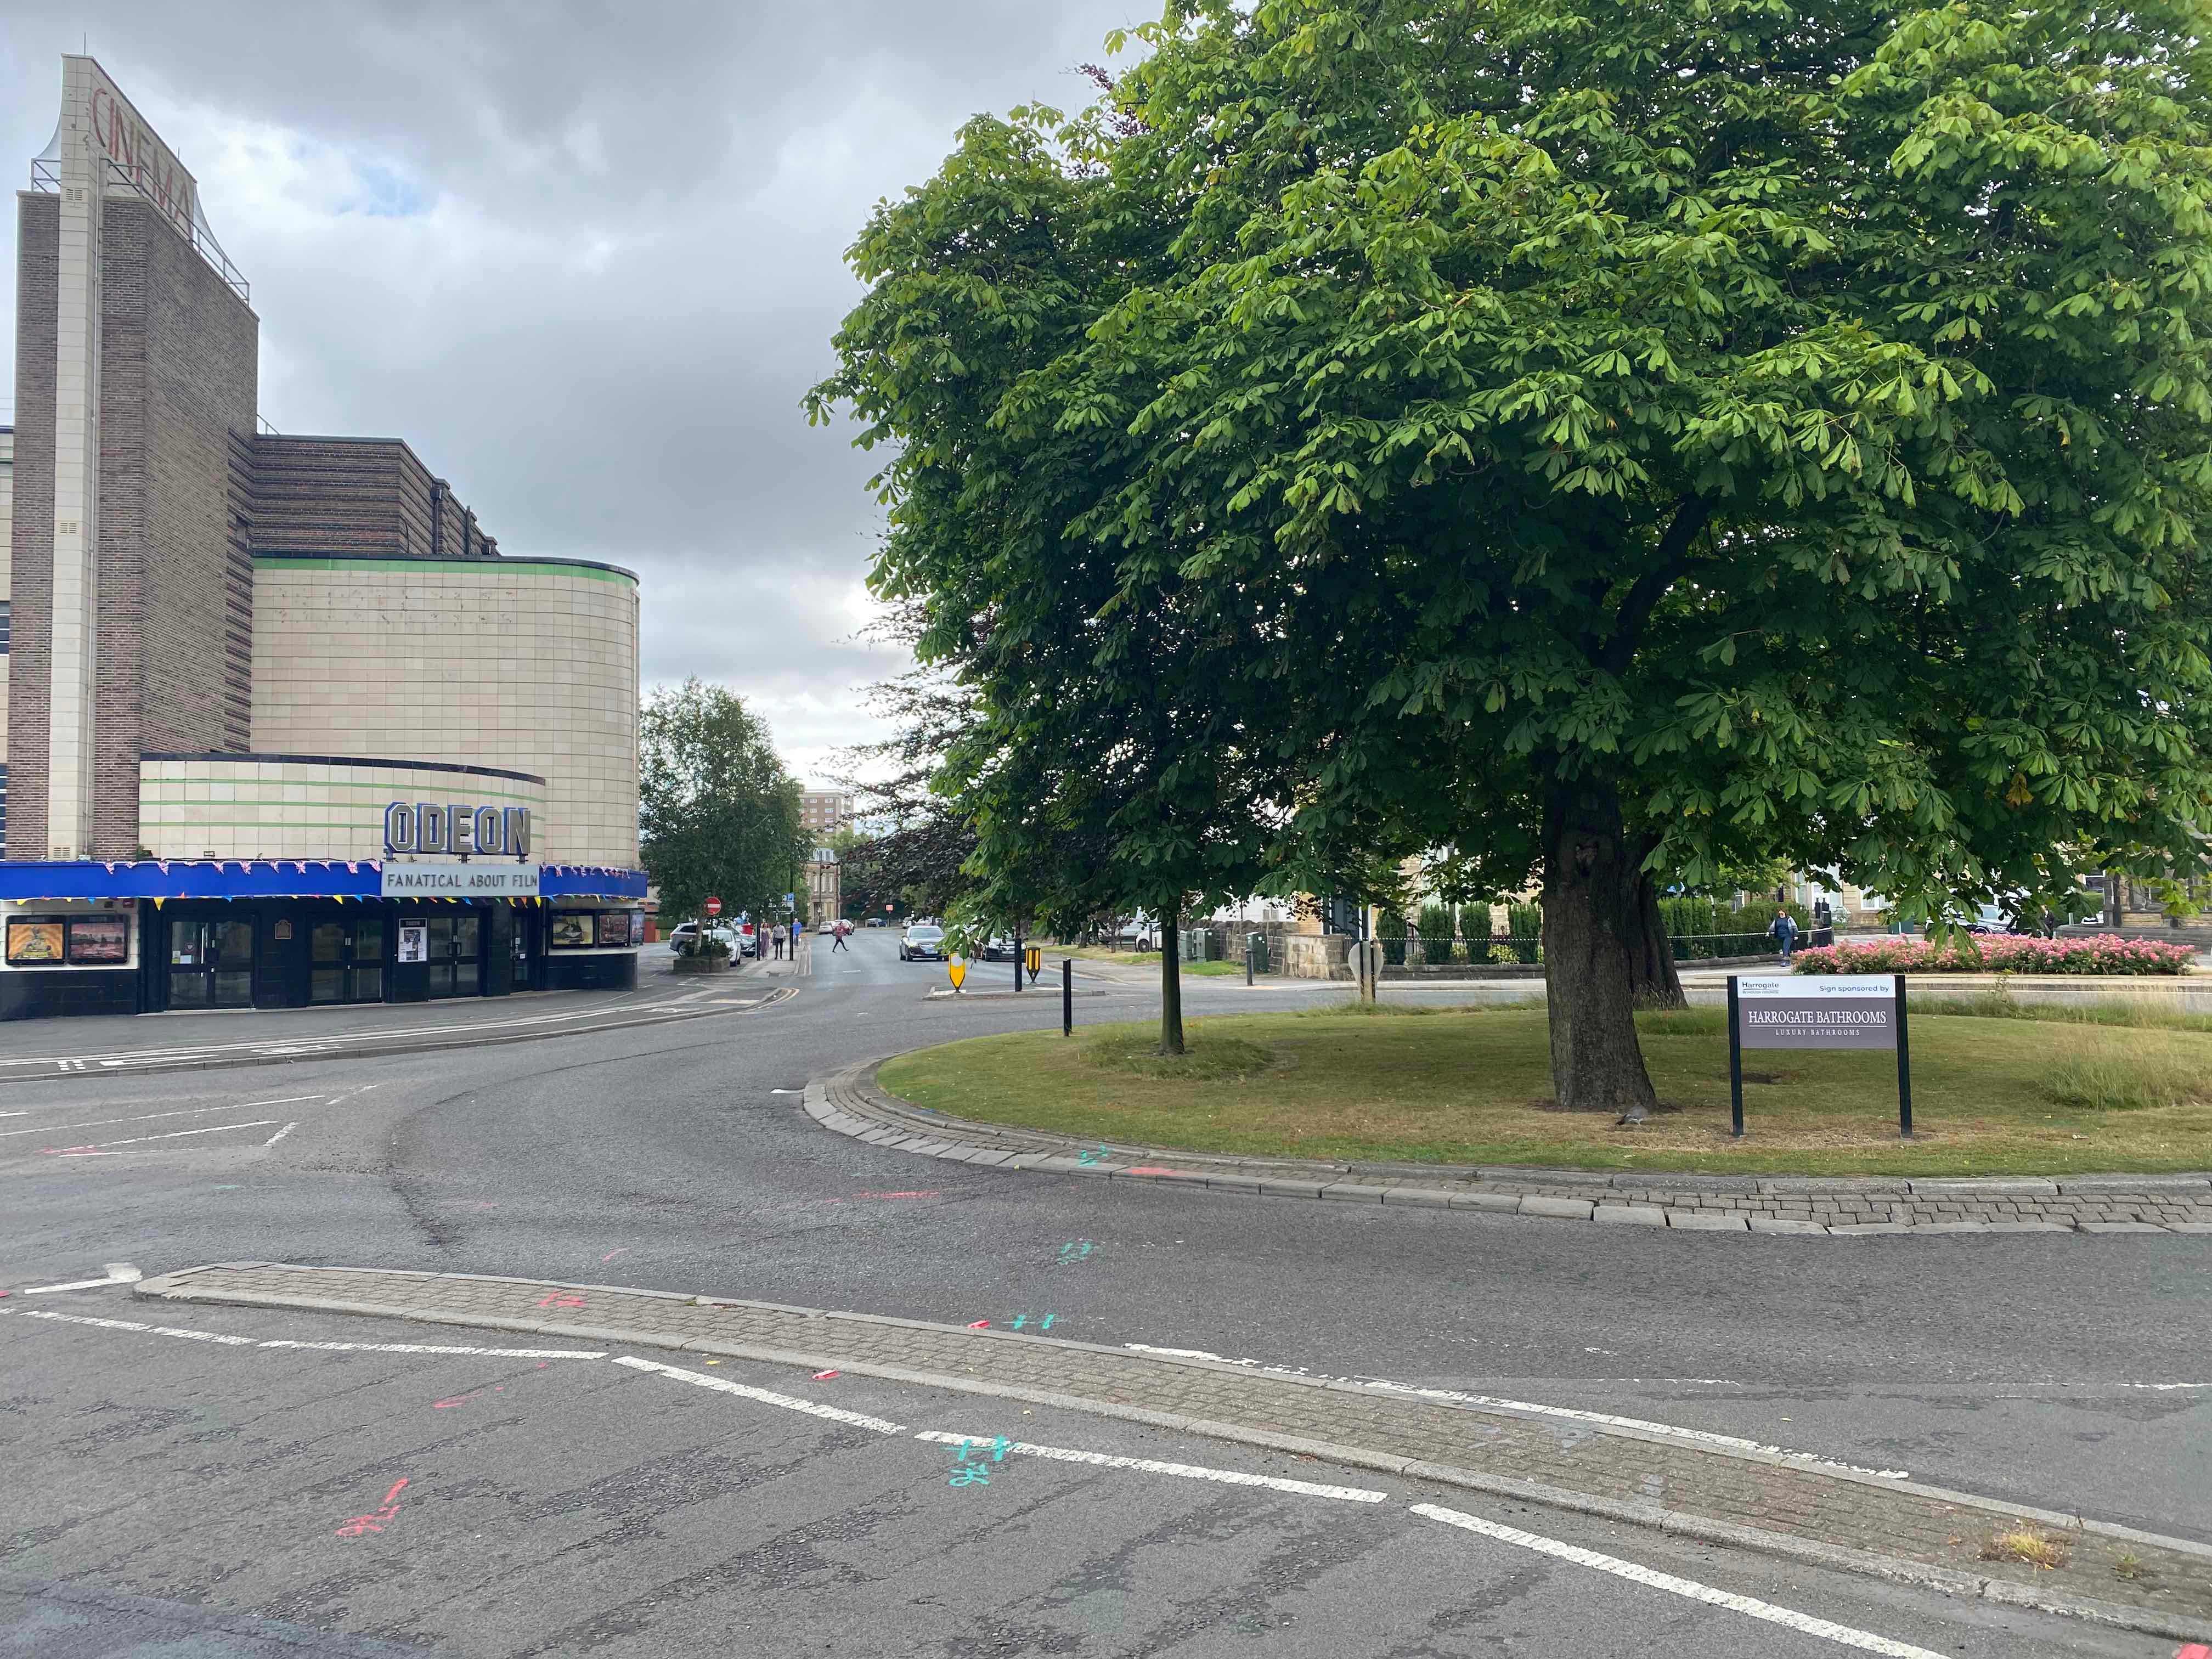 Odeon roundabout